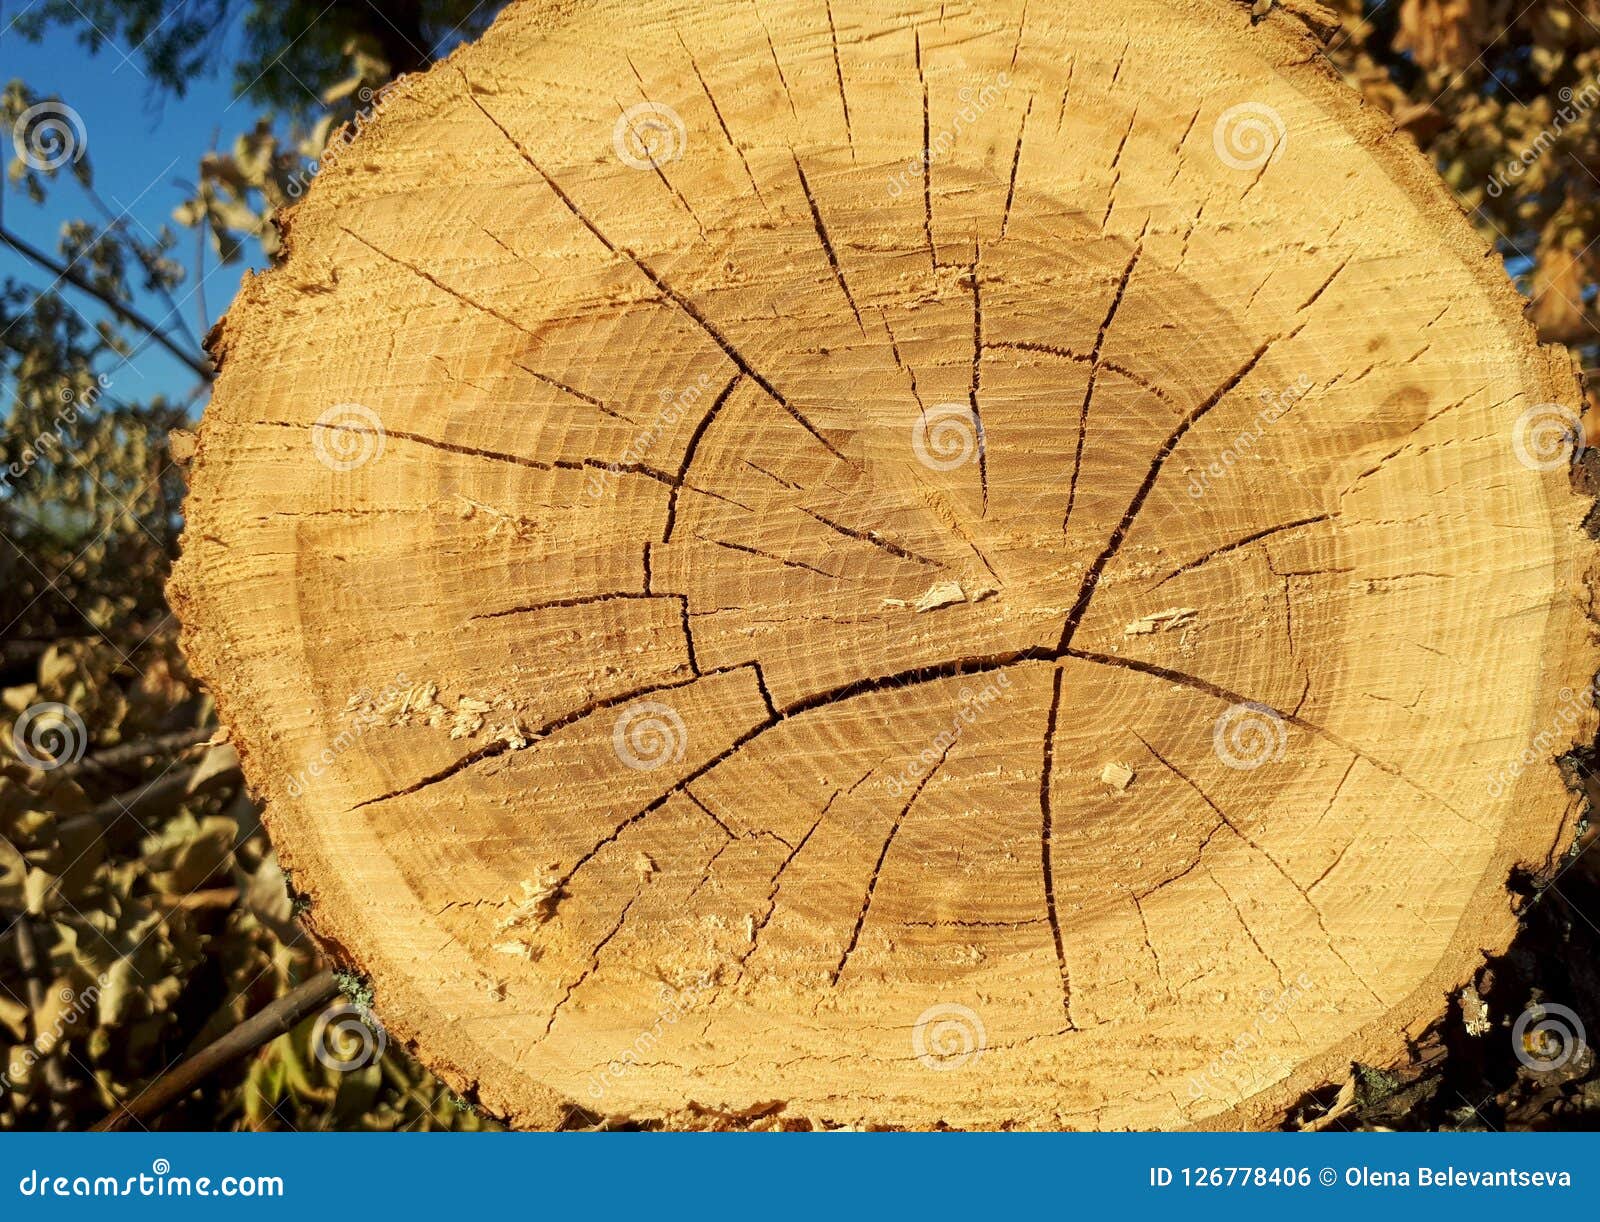 Tree Ring Dating Lesson, Dendrochronology, Plant Vascular System | Science  classroom, Lesson, Science education